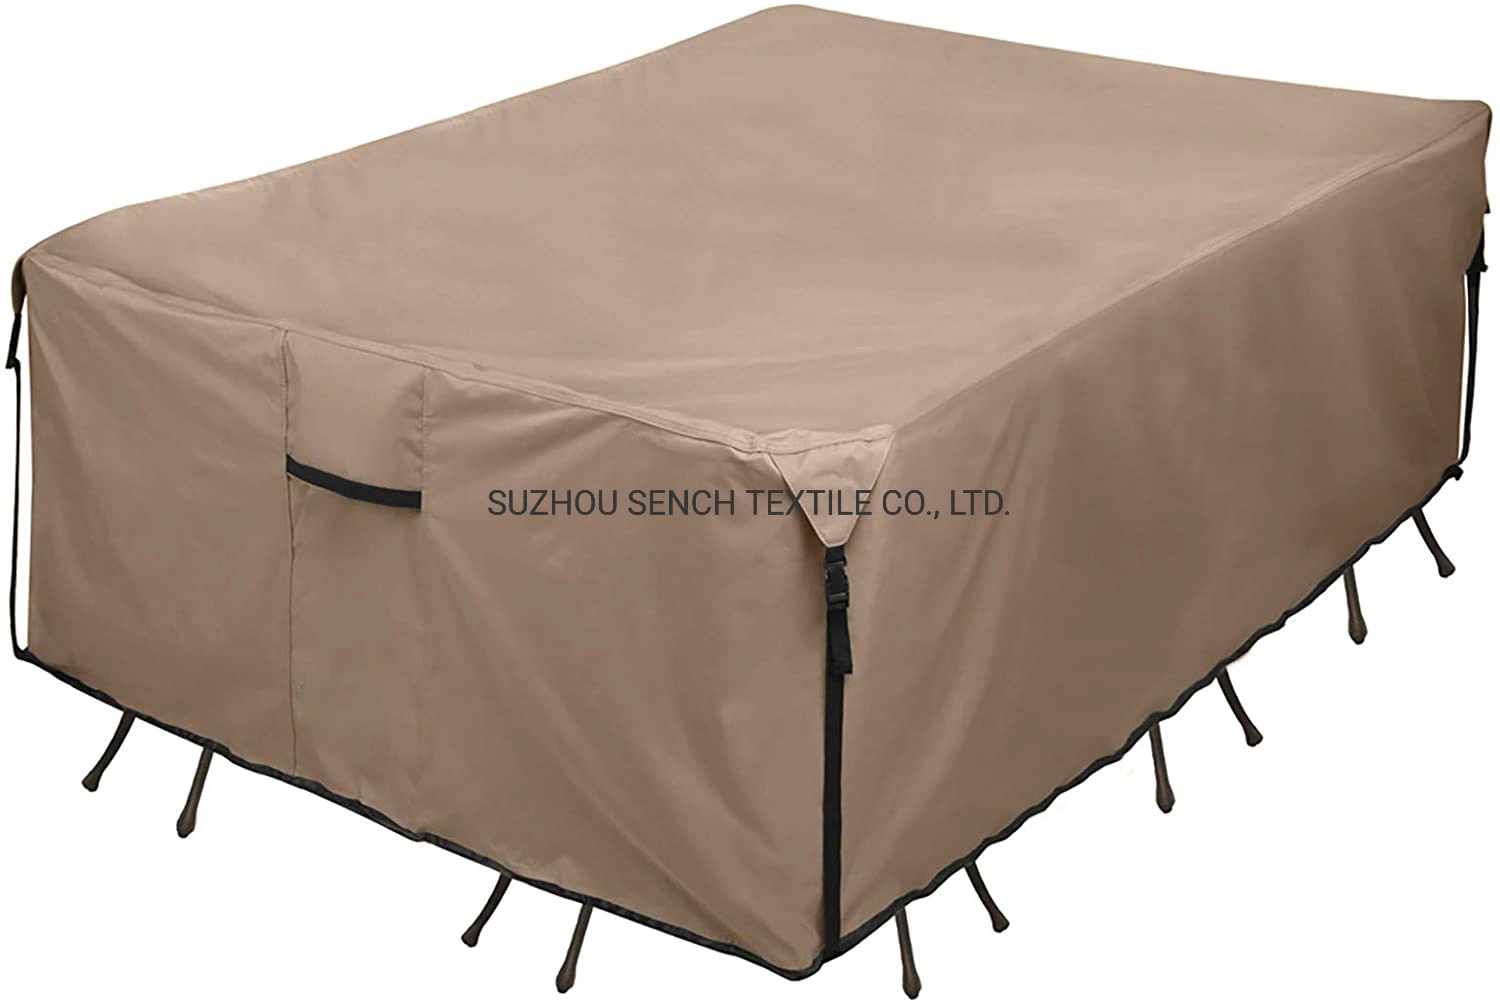 Rectangular Patio Heavy Duty Table Cover - 600d Tough Canvas Waterproof Outdoor Dining Table and Chairs General Purpose Furniture Cover Size Customed